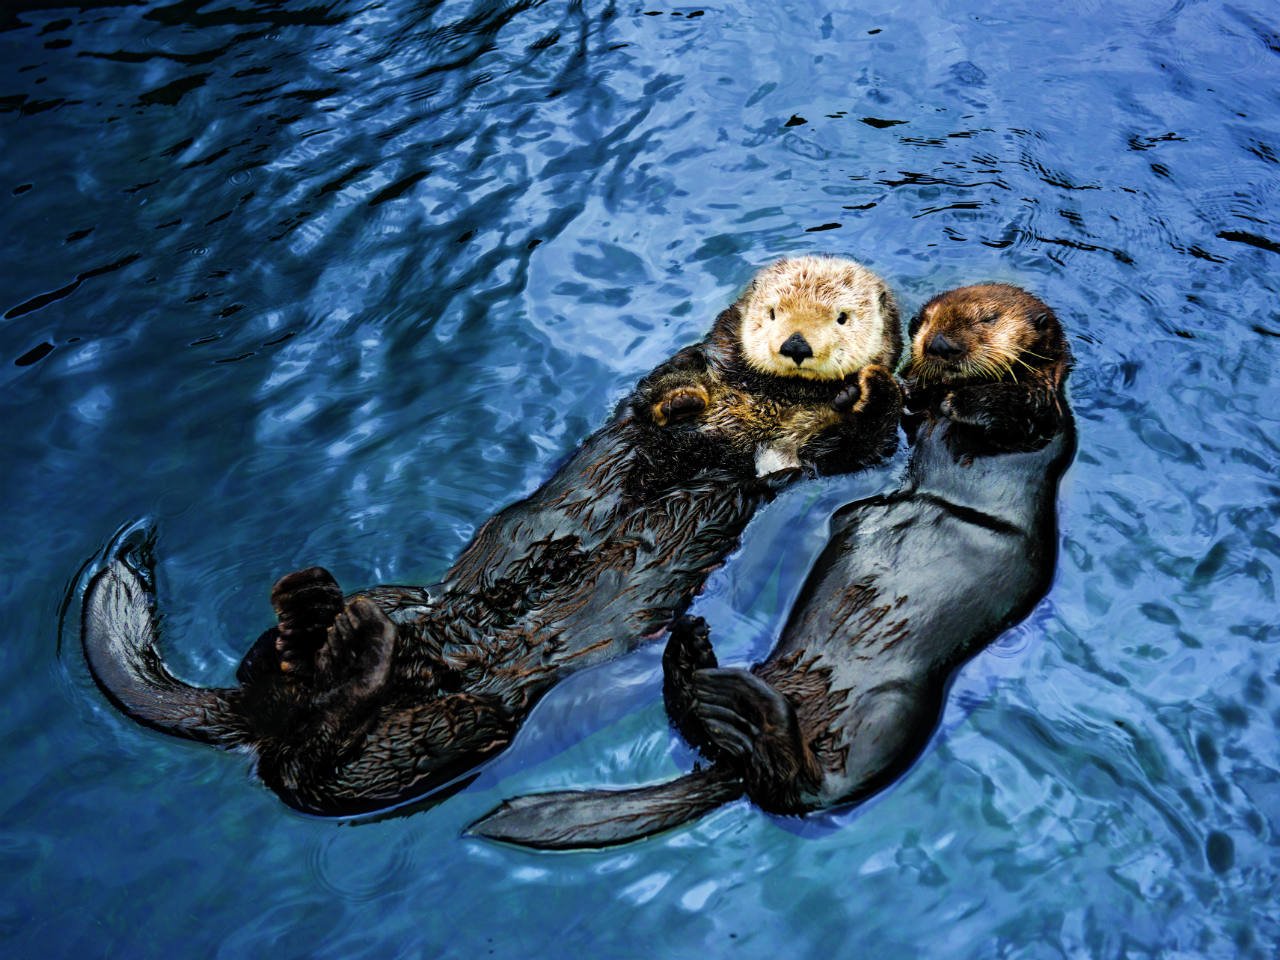 Two otters woking at the cameras while floating in the water at the Vancouver Aquarium